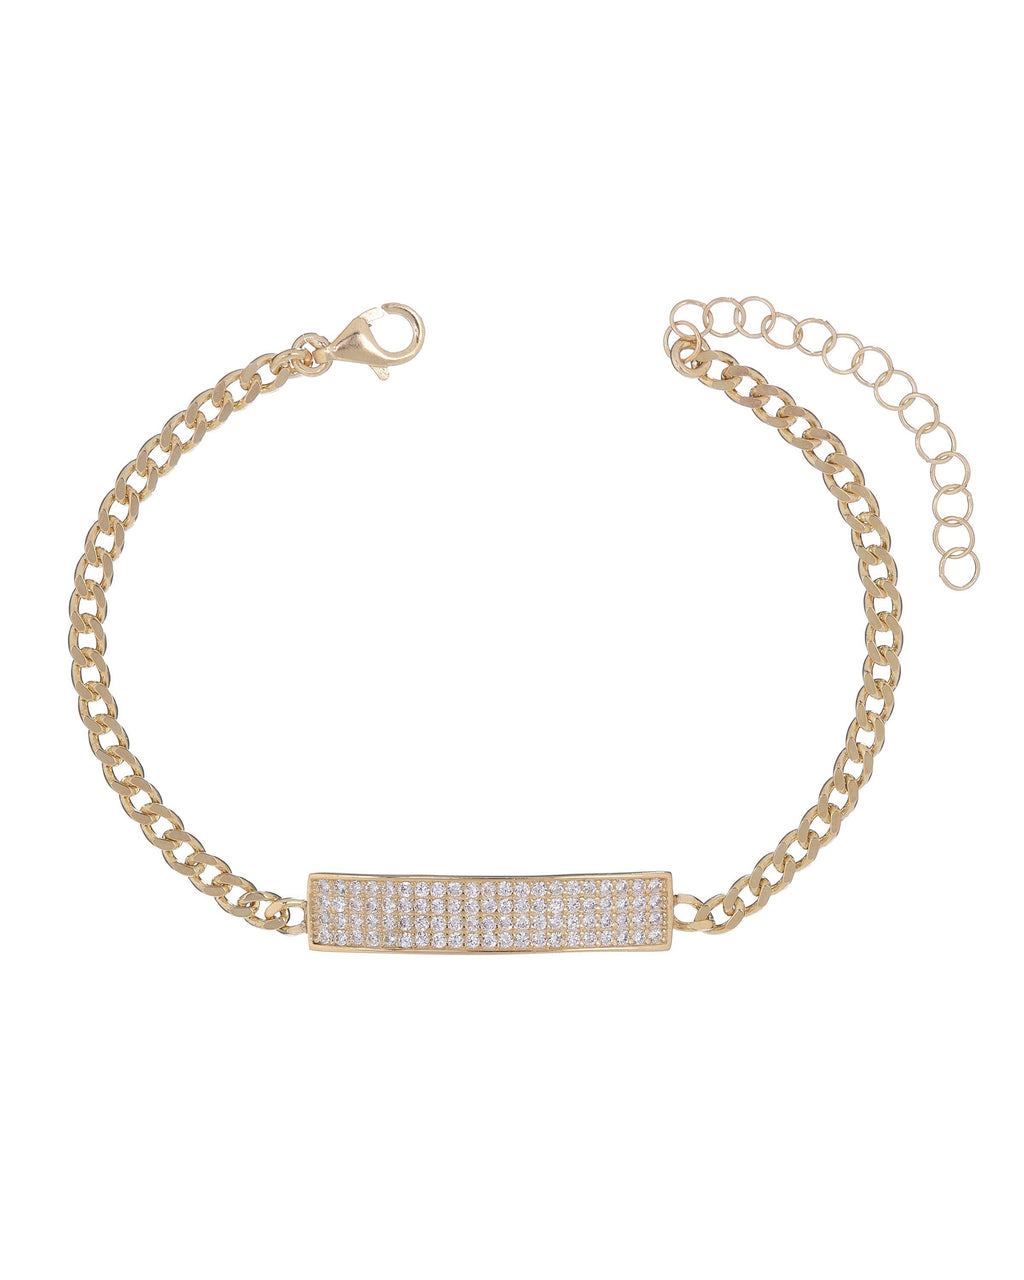 Pave White Topaz Chain Bracelet 7.8" +2" Embellished with Austrian Crystals in 18K Rose Gold Plated